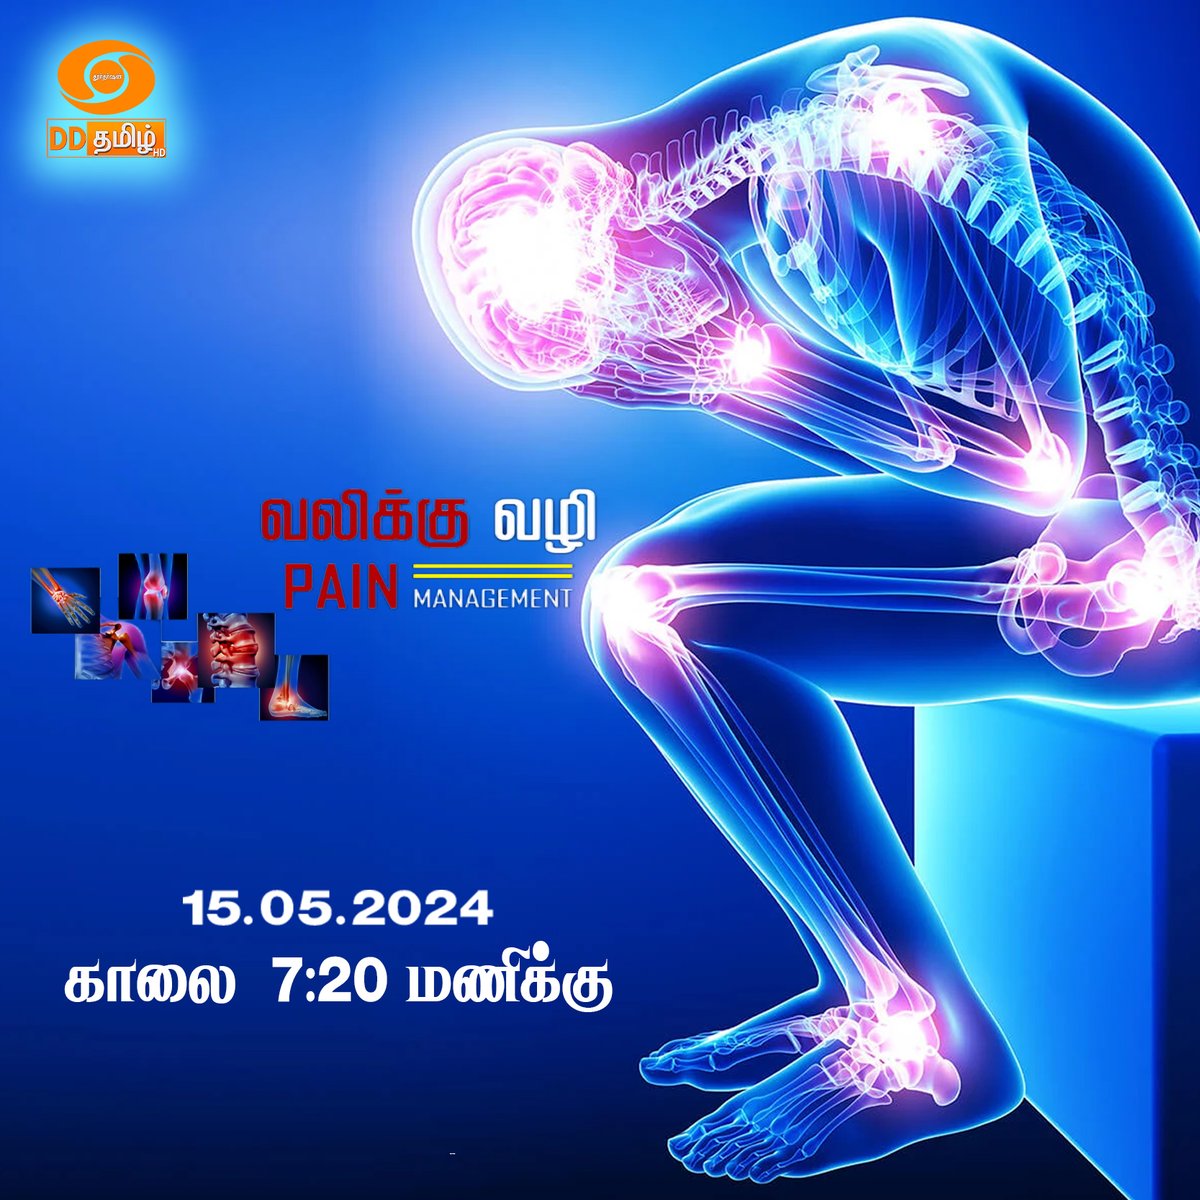 📷 Set your alarms for 7:20 AM ! Join us on @DDTamilOfficial for 'Valikku Vazhi,' Epi-115 a program dedicated to guiding you on the path to pain-free living. Don't miss out on valuable tips and insights! 📷📷 #PainRelief #HealthTips #DDtamil #valikkuvazhi
youtu.be/AD2WPfFlZp8